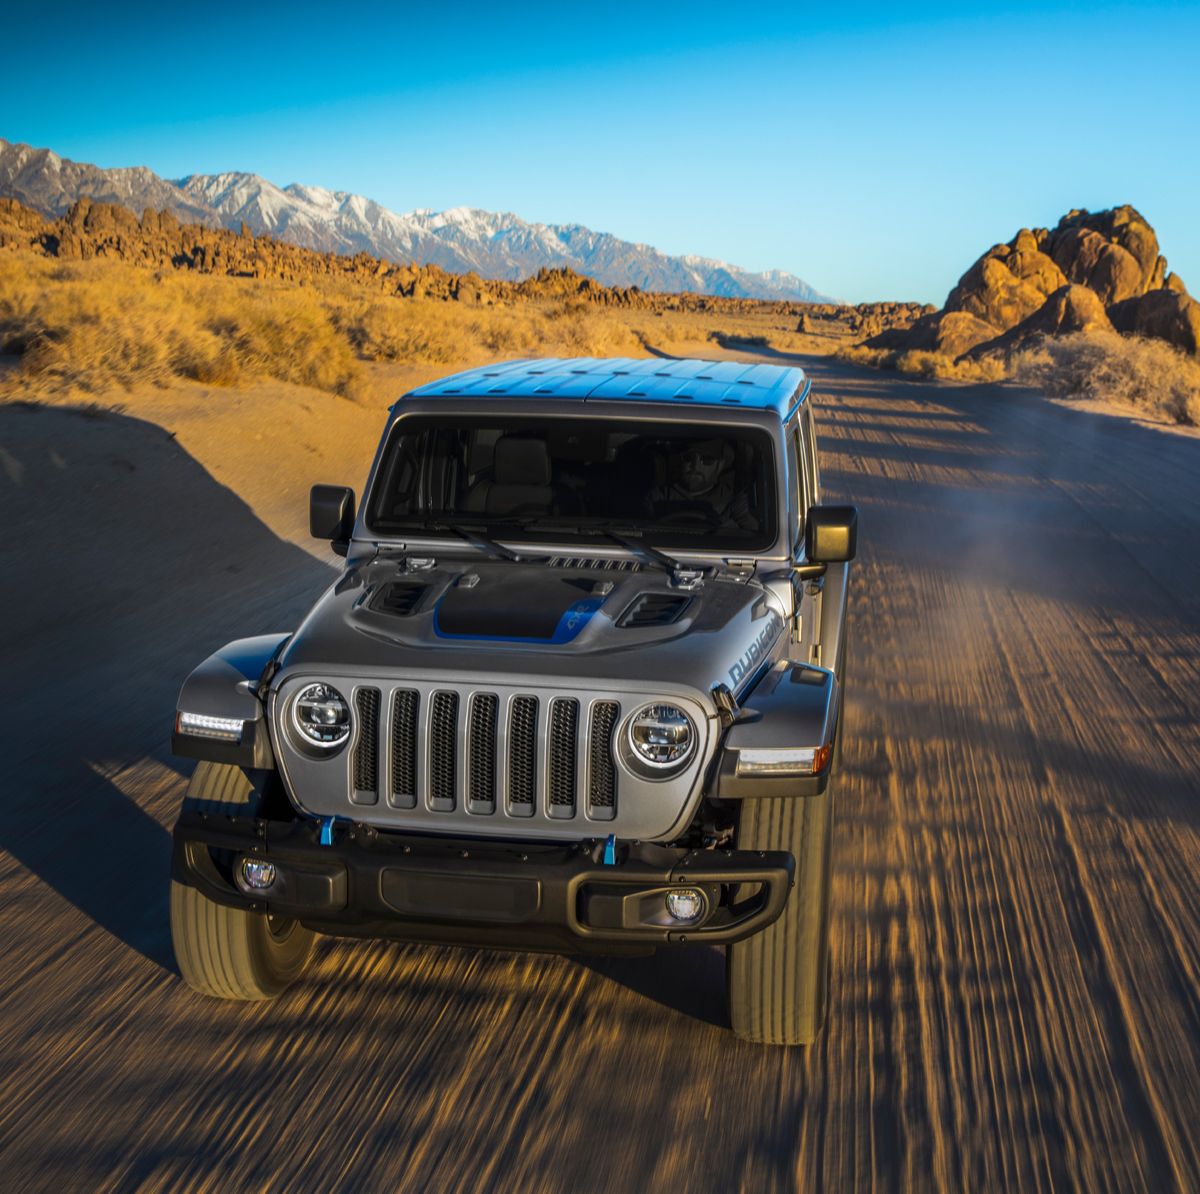 Jeep Recalls Nearly 63K Wrangler 4xes over Engine Shutdown Issues